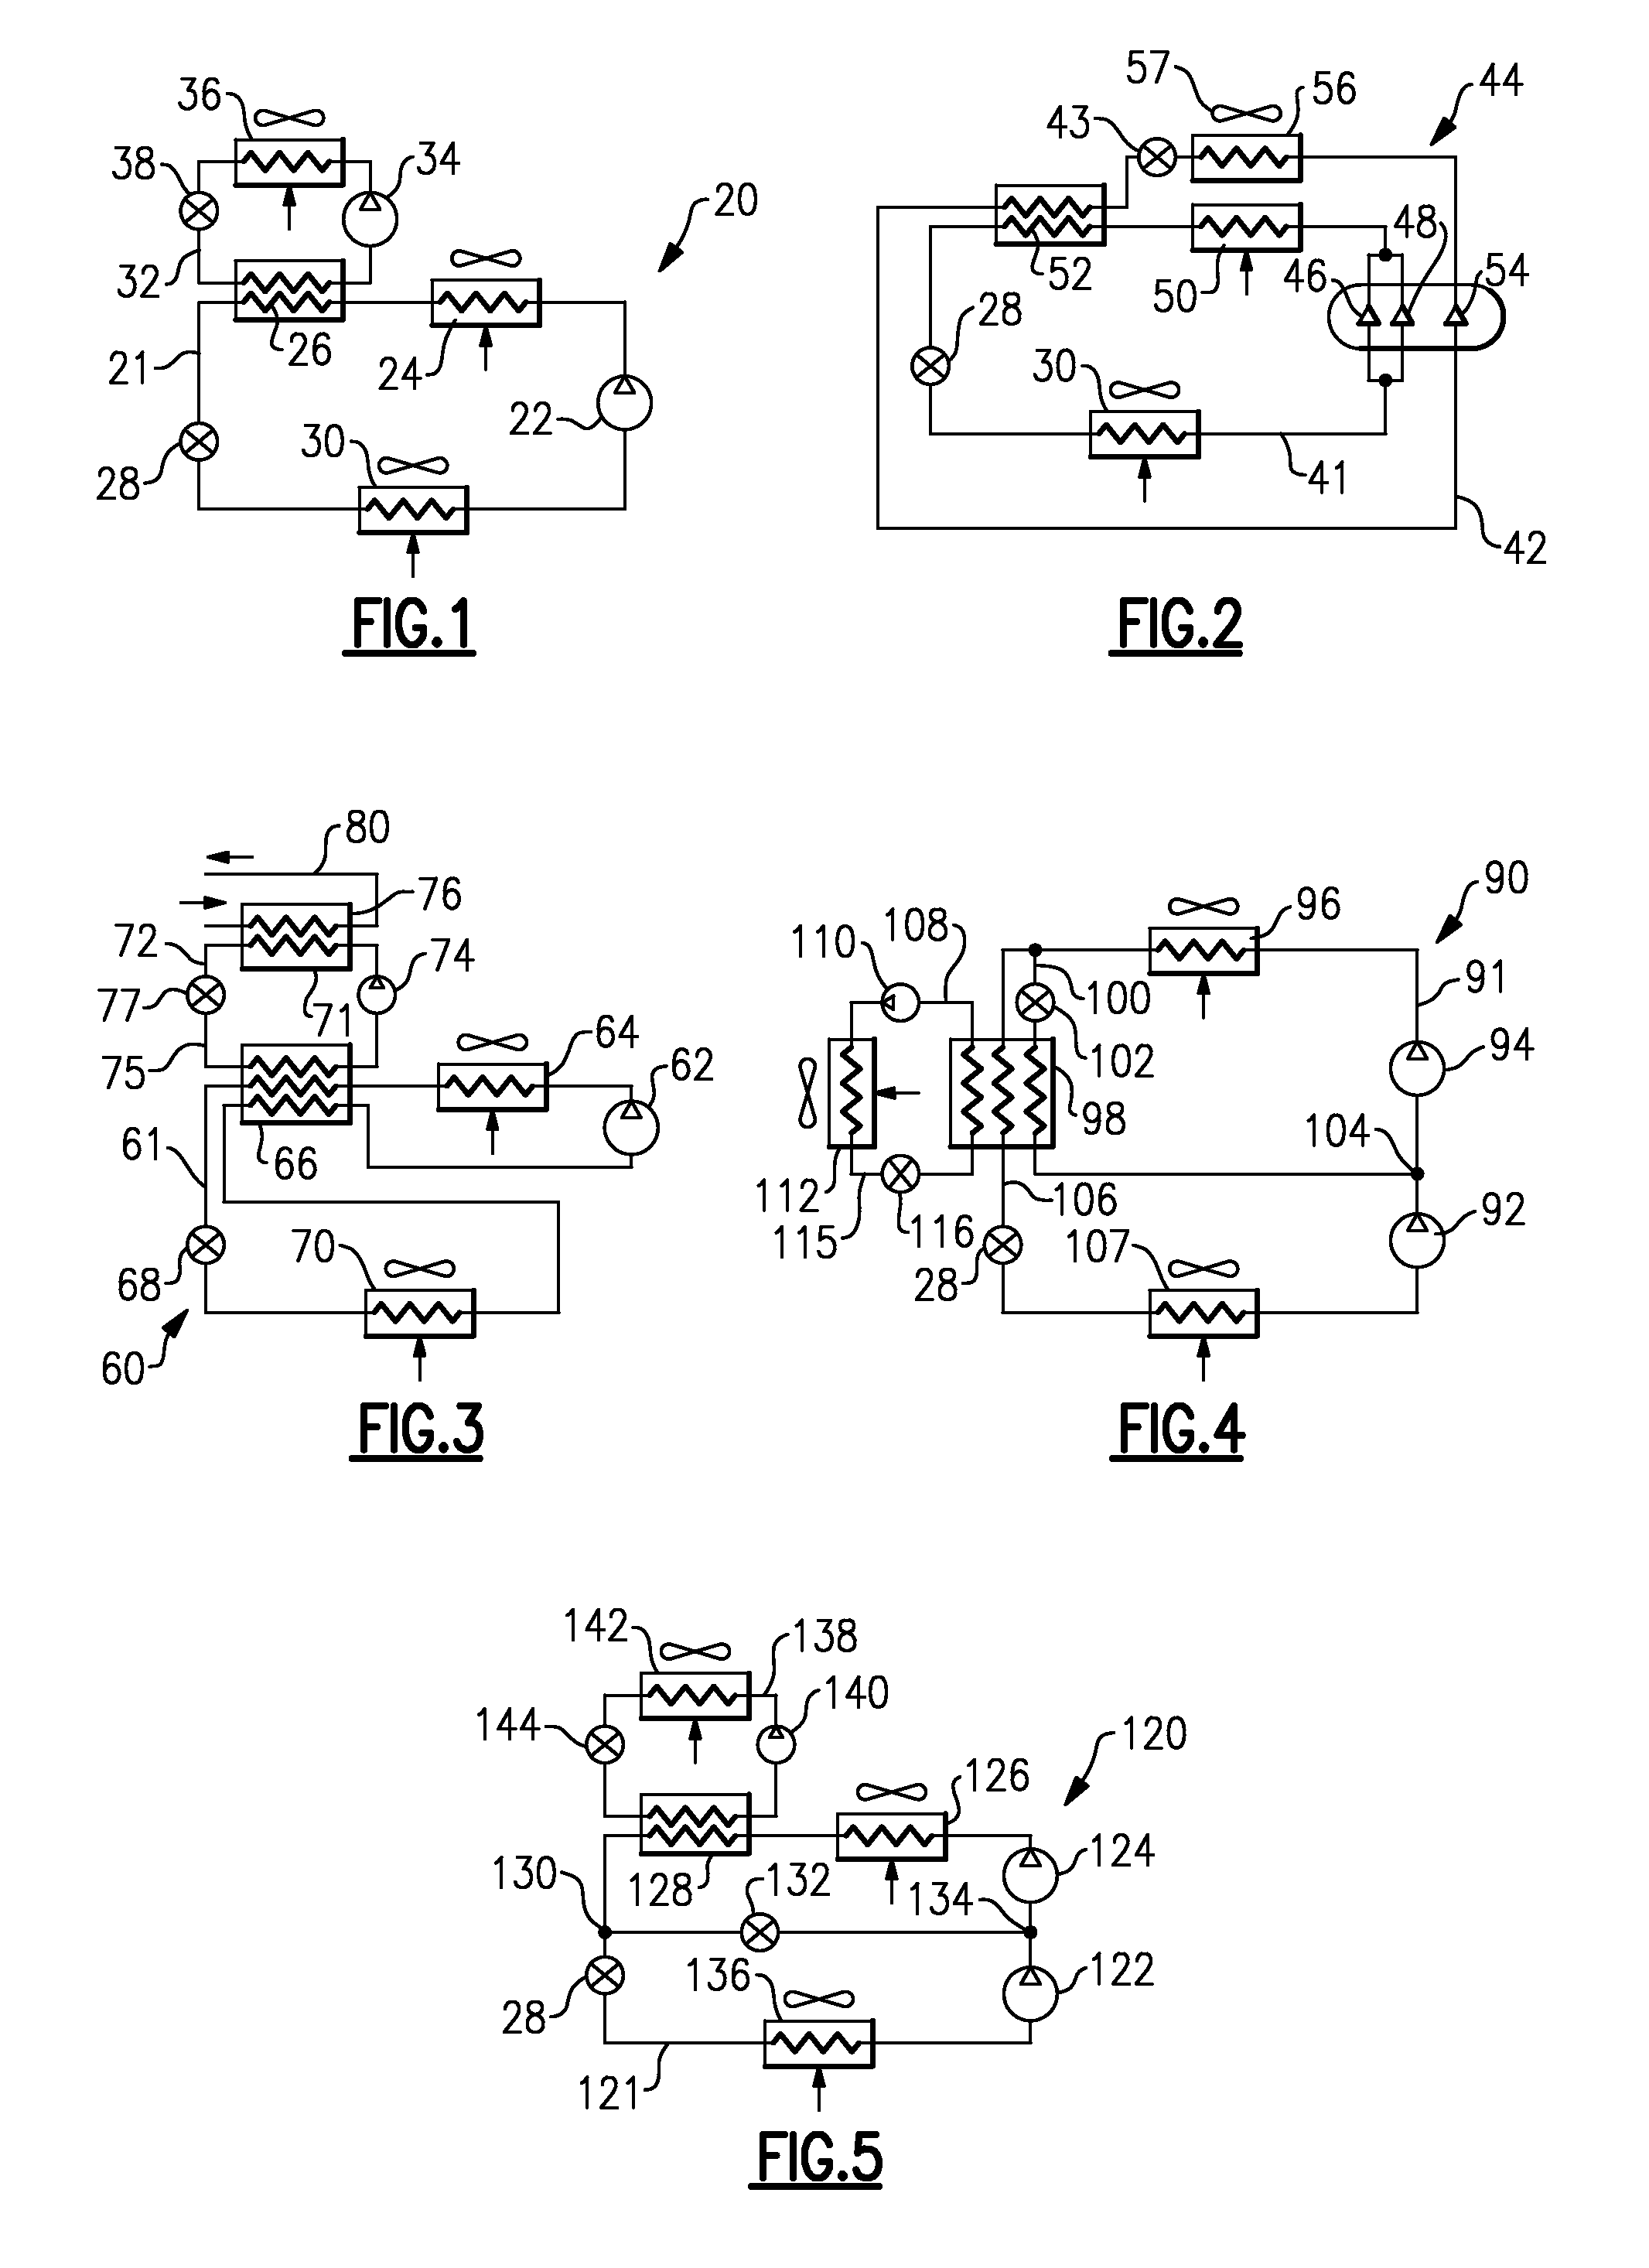 Co2 refrigerant system with booster circuit